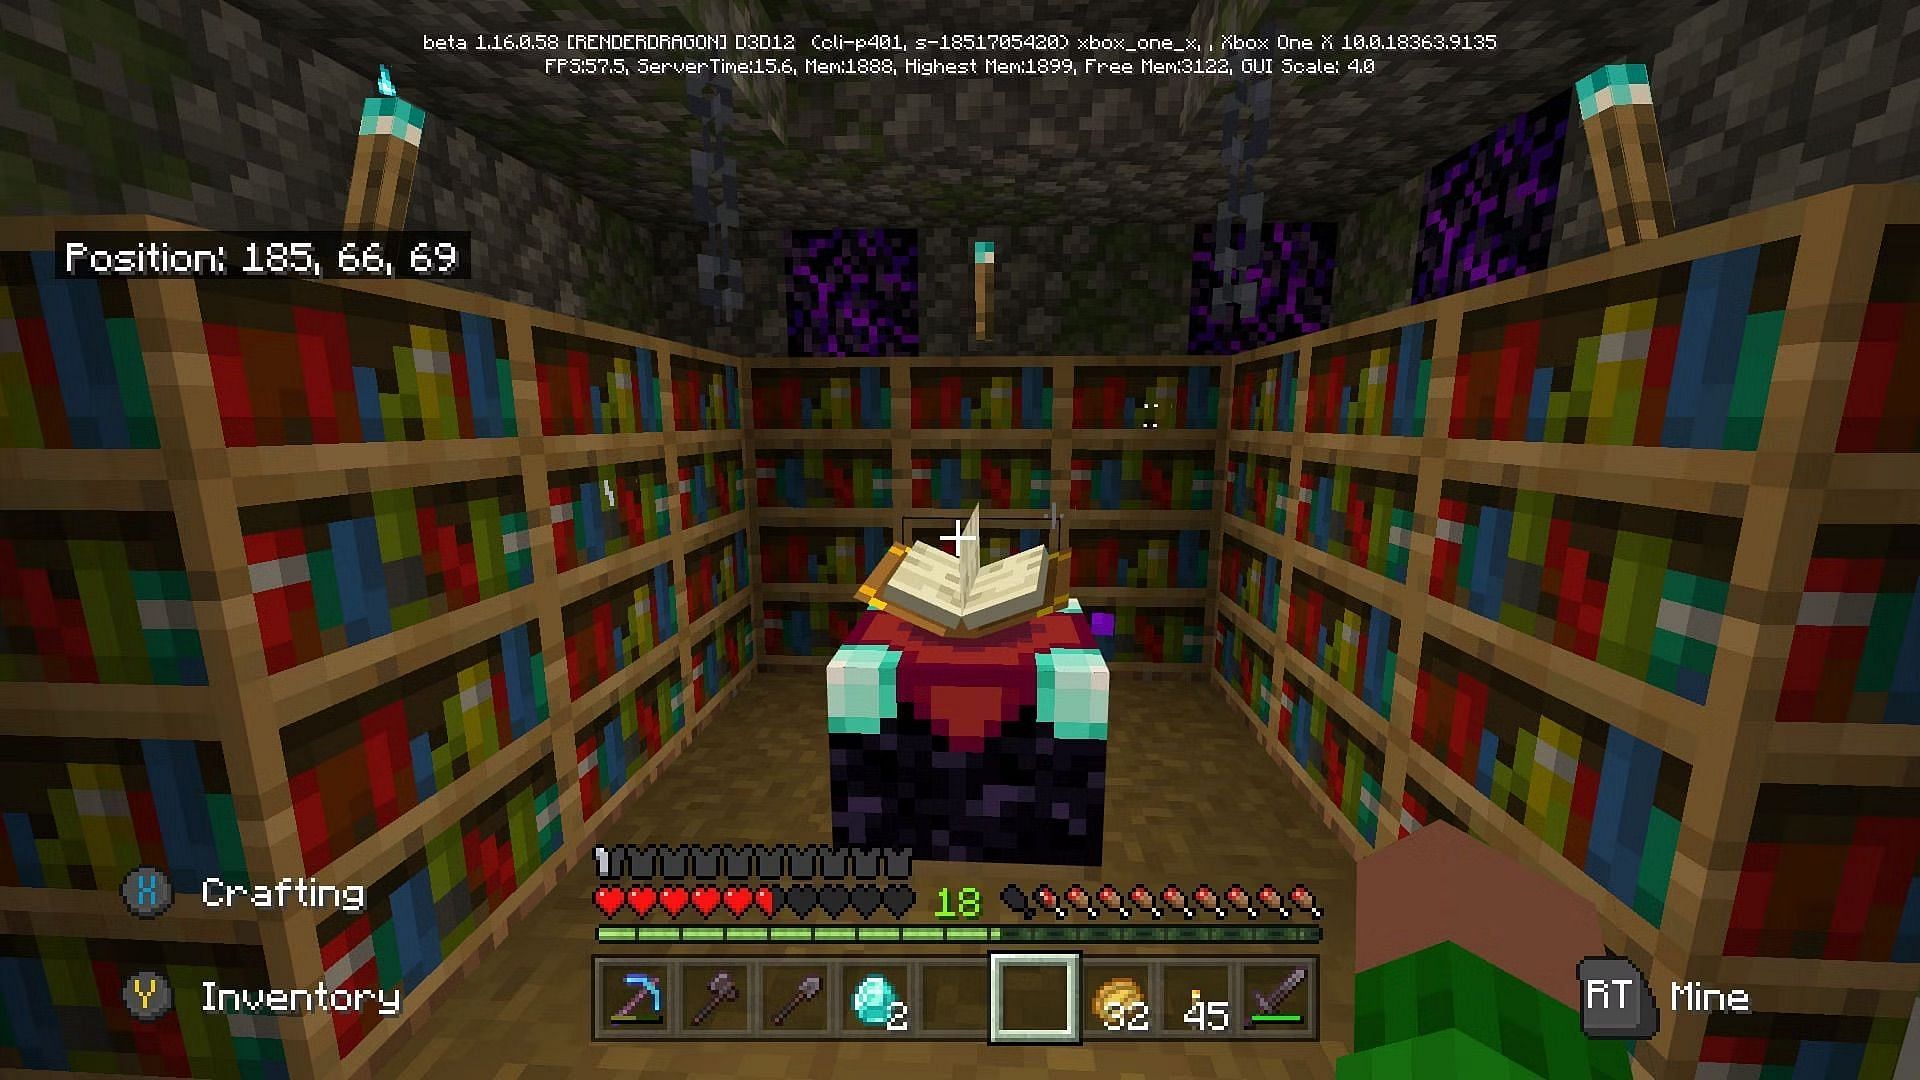 Using the enchantment table is one of the ways of getting Fortune enchantment (Image via Mojang Studios)